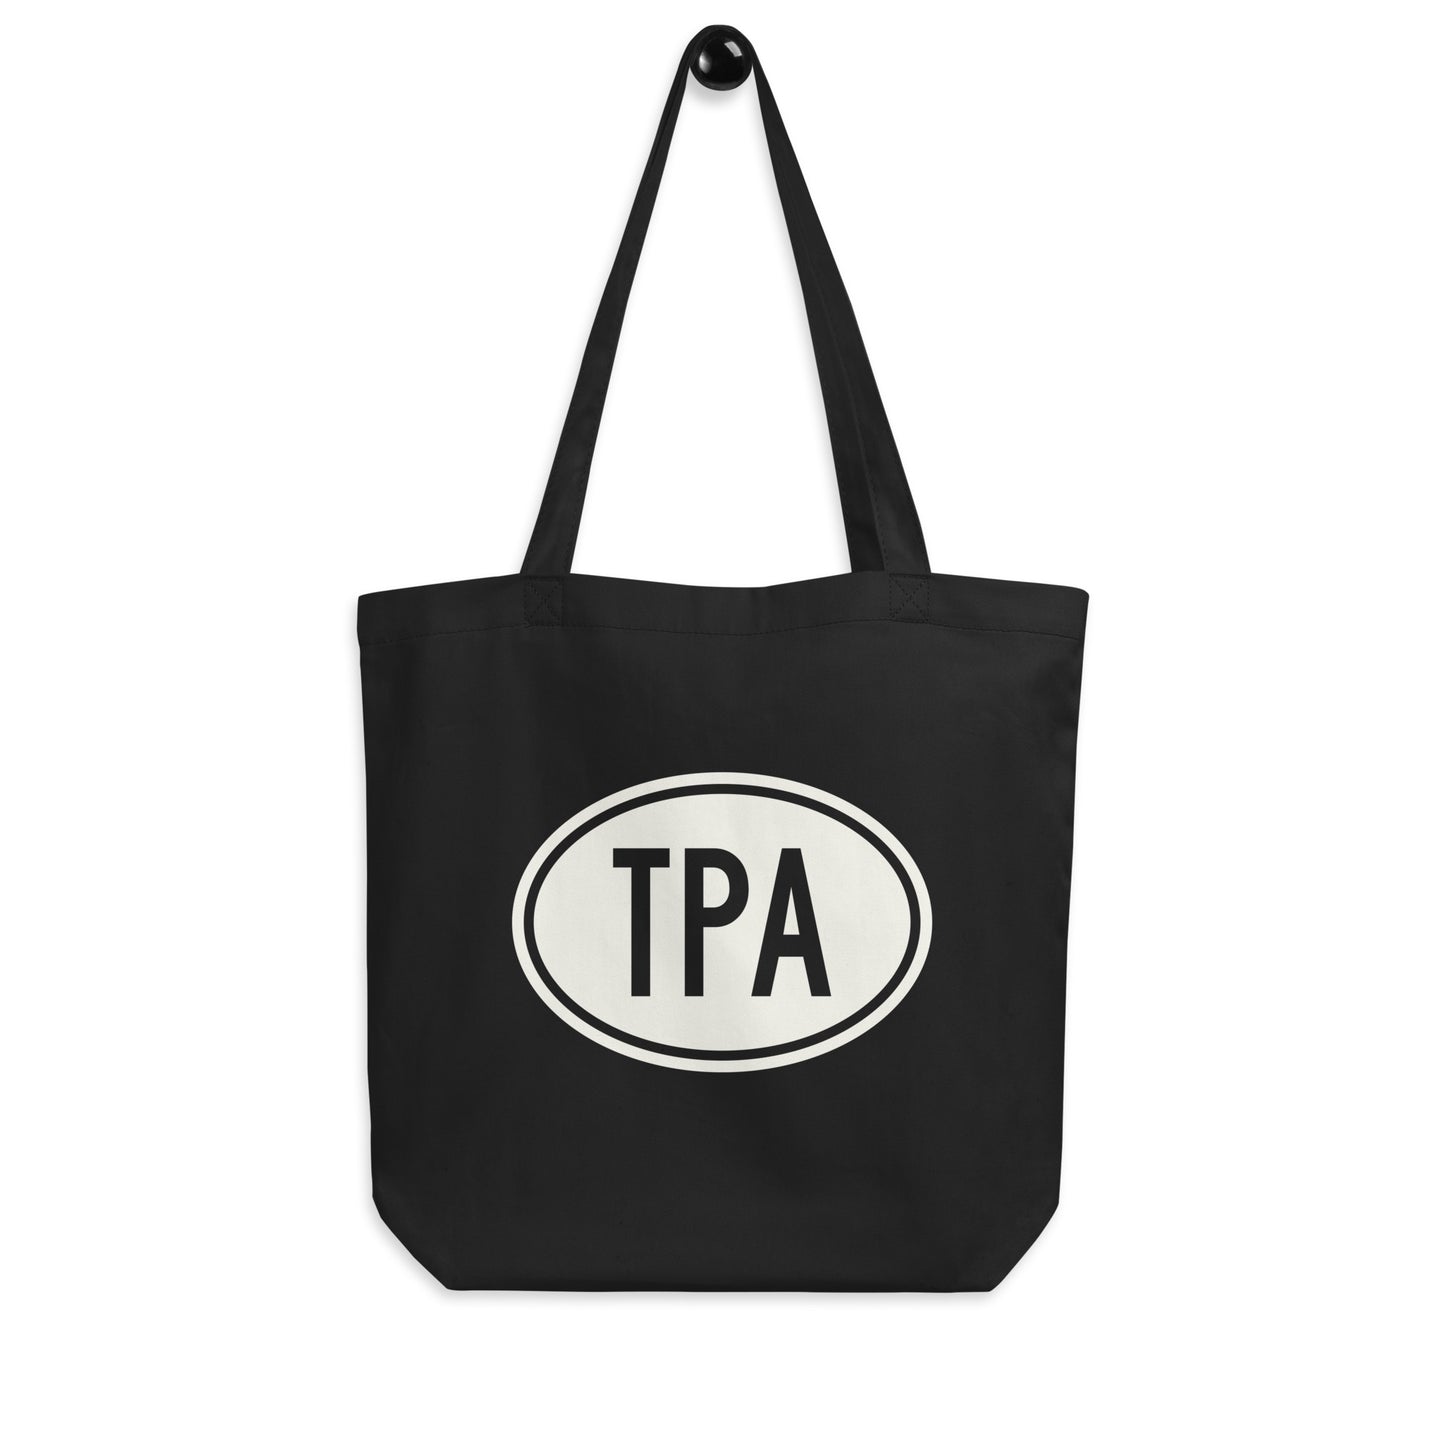 Unique Travel Gift Organic Tote - White Oval • TPA Tampa • YHM Designs - Image 04